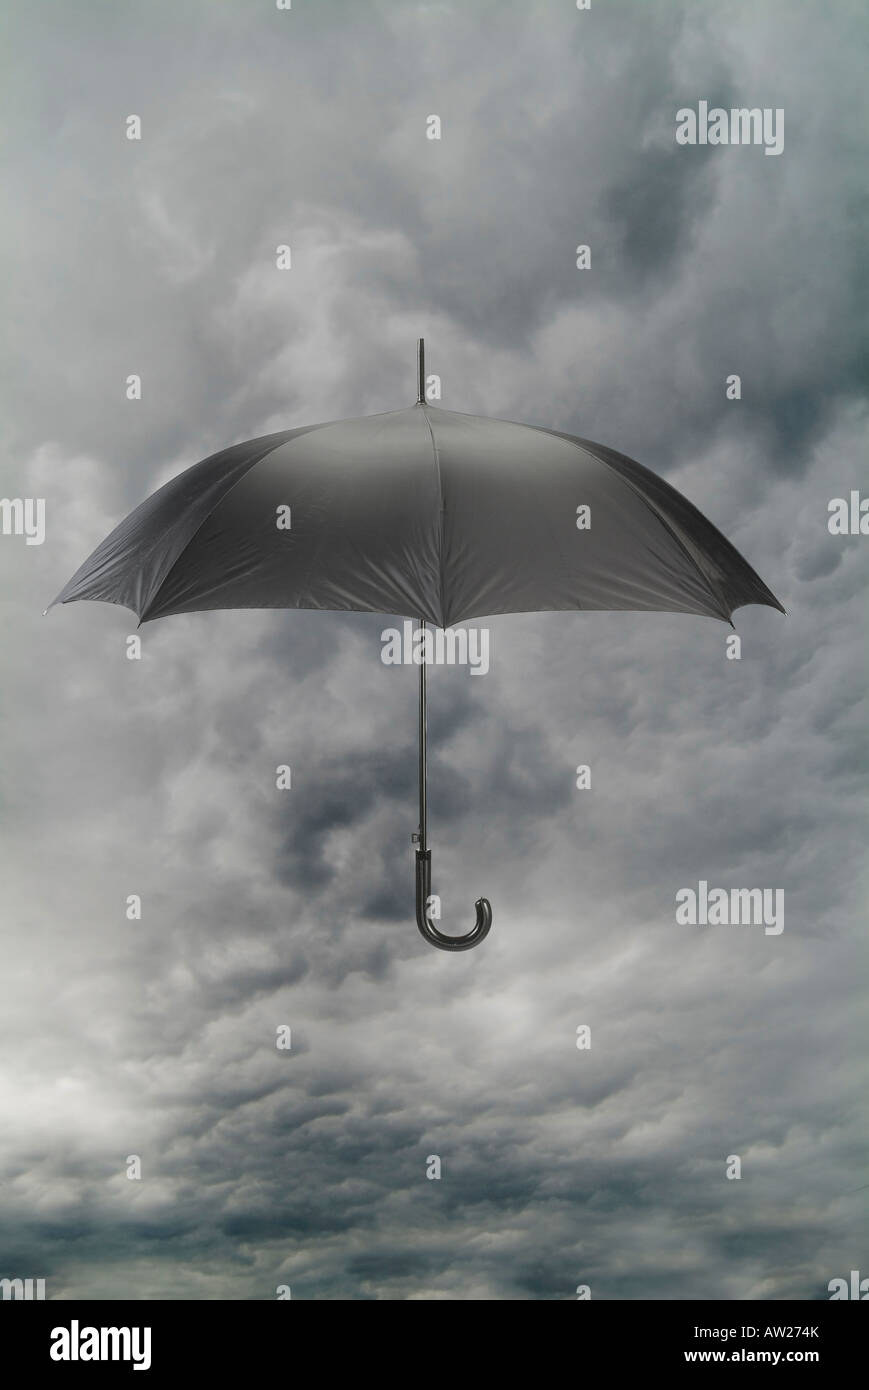 Umbrella With Rain Storm Clouds In Bad Weather Stock Photo